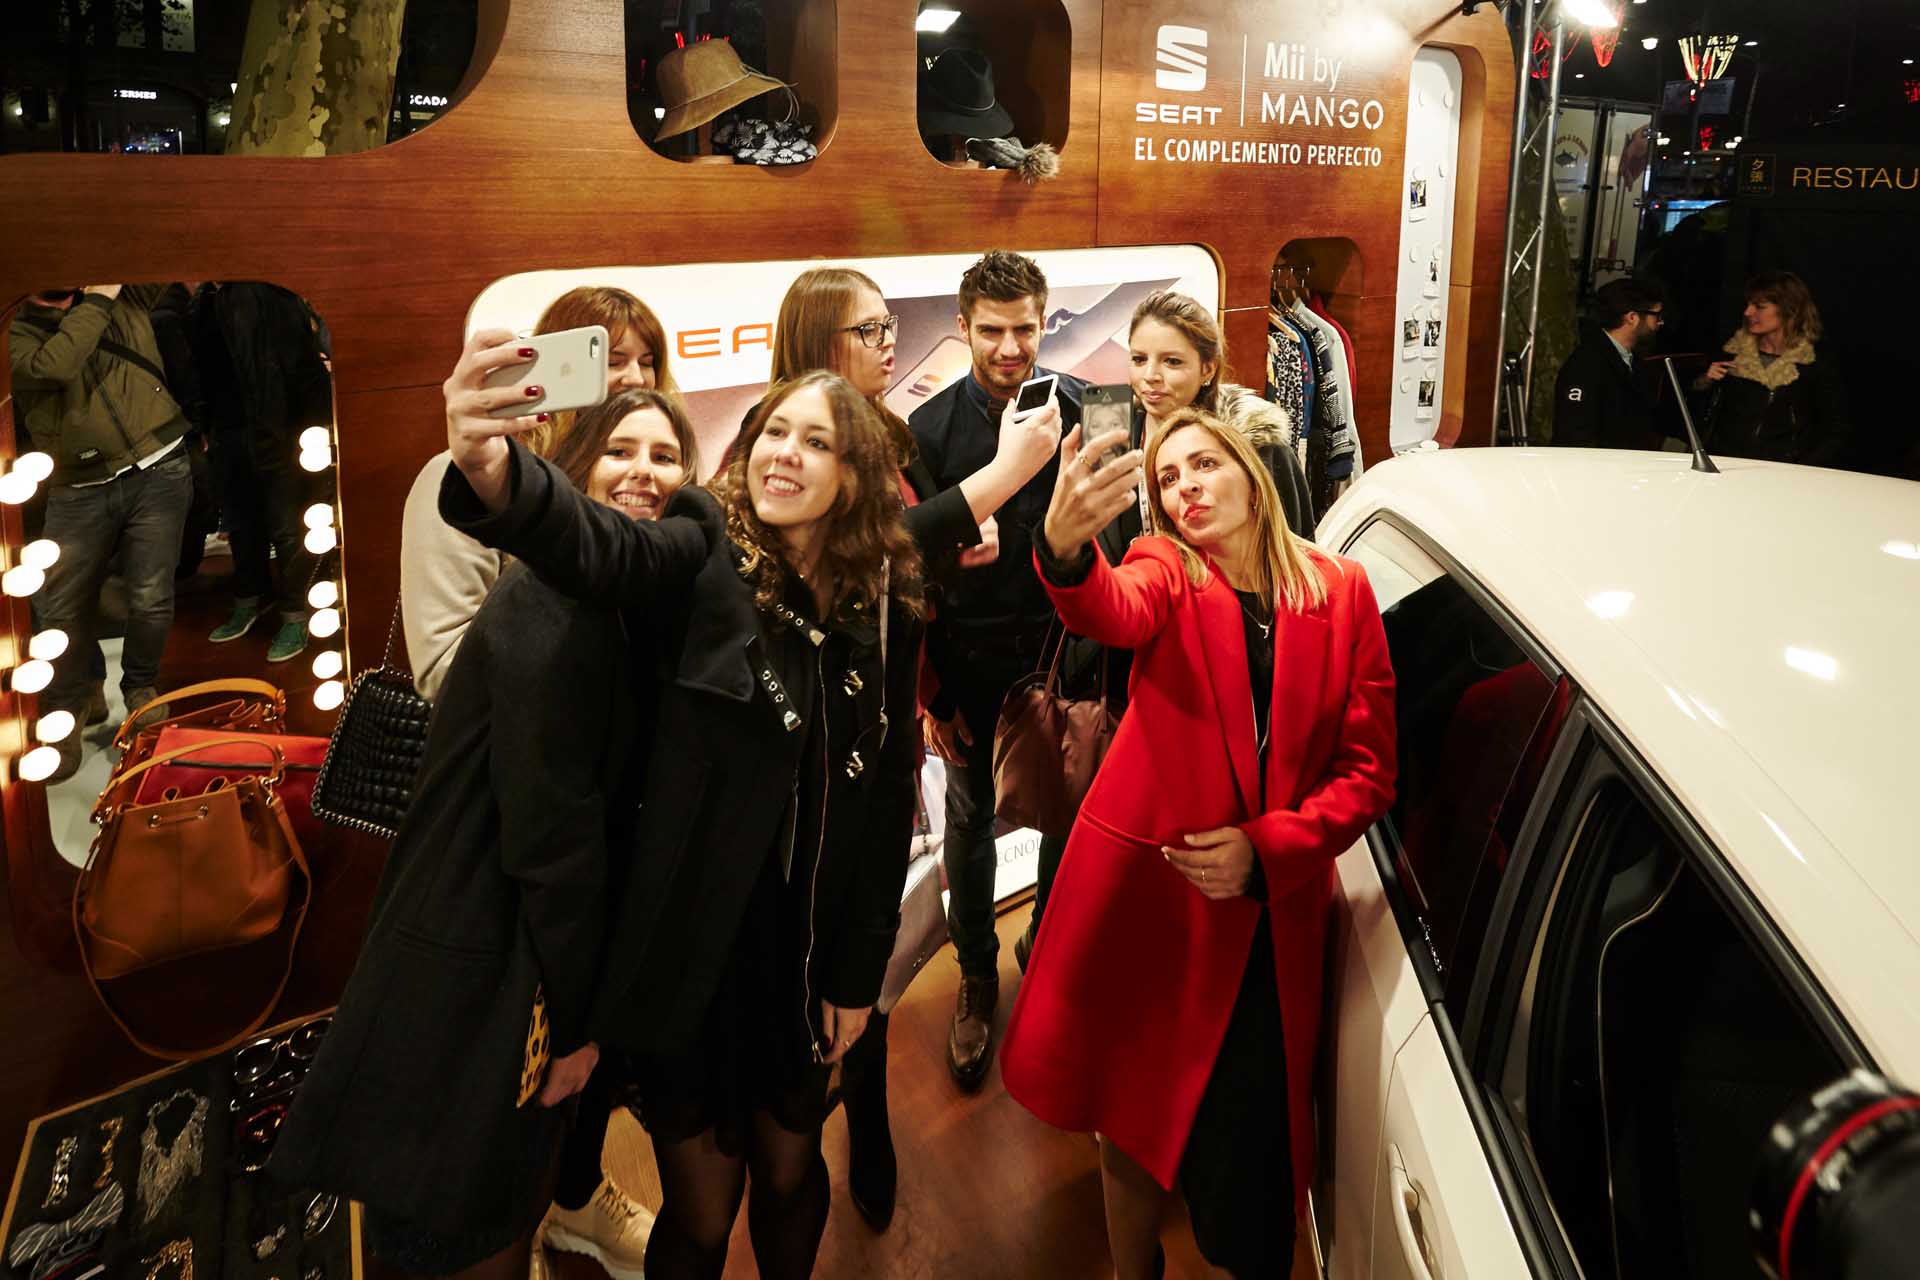 Presentation of the Seat Mii by Mango by Marc Díez Corporate photographer in Barcelona